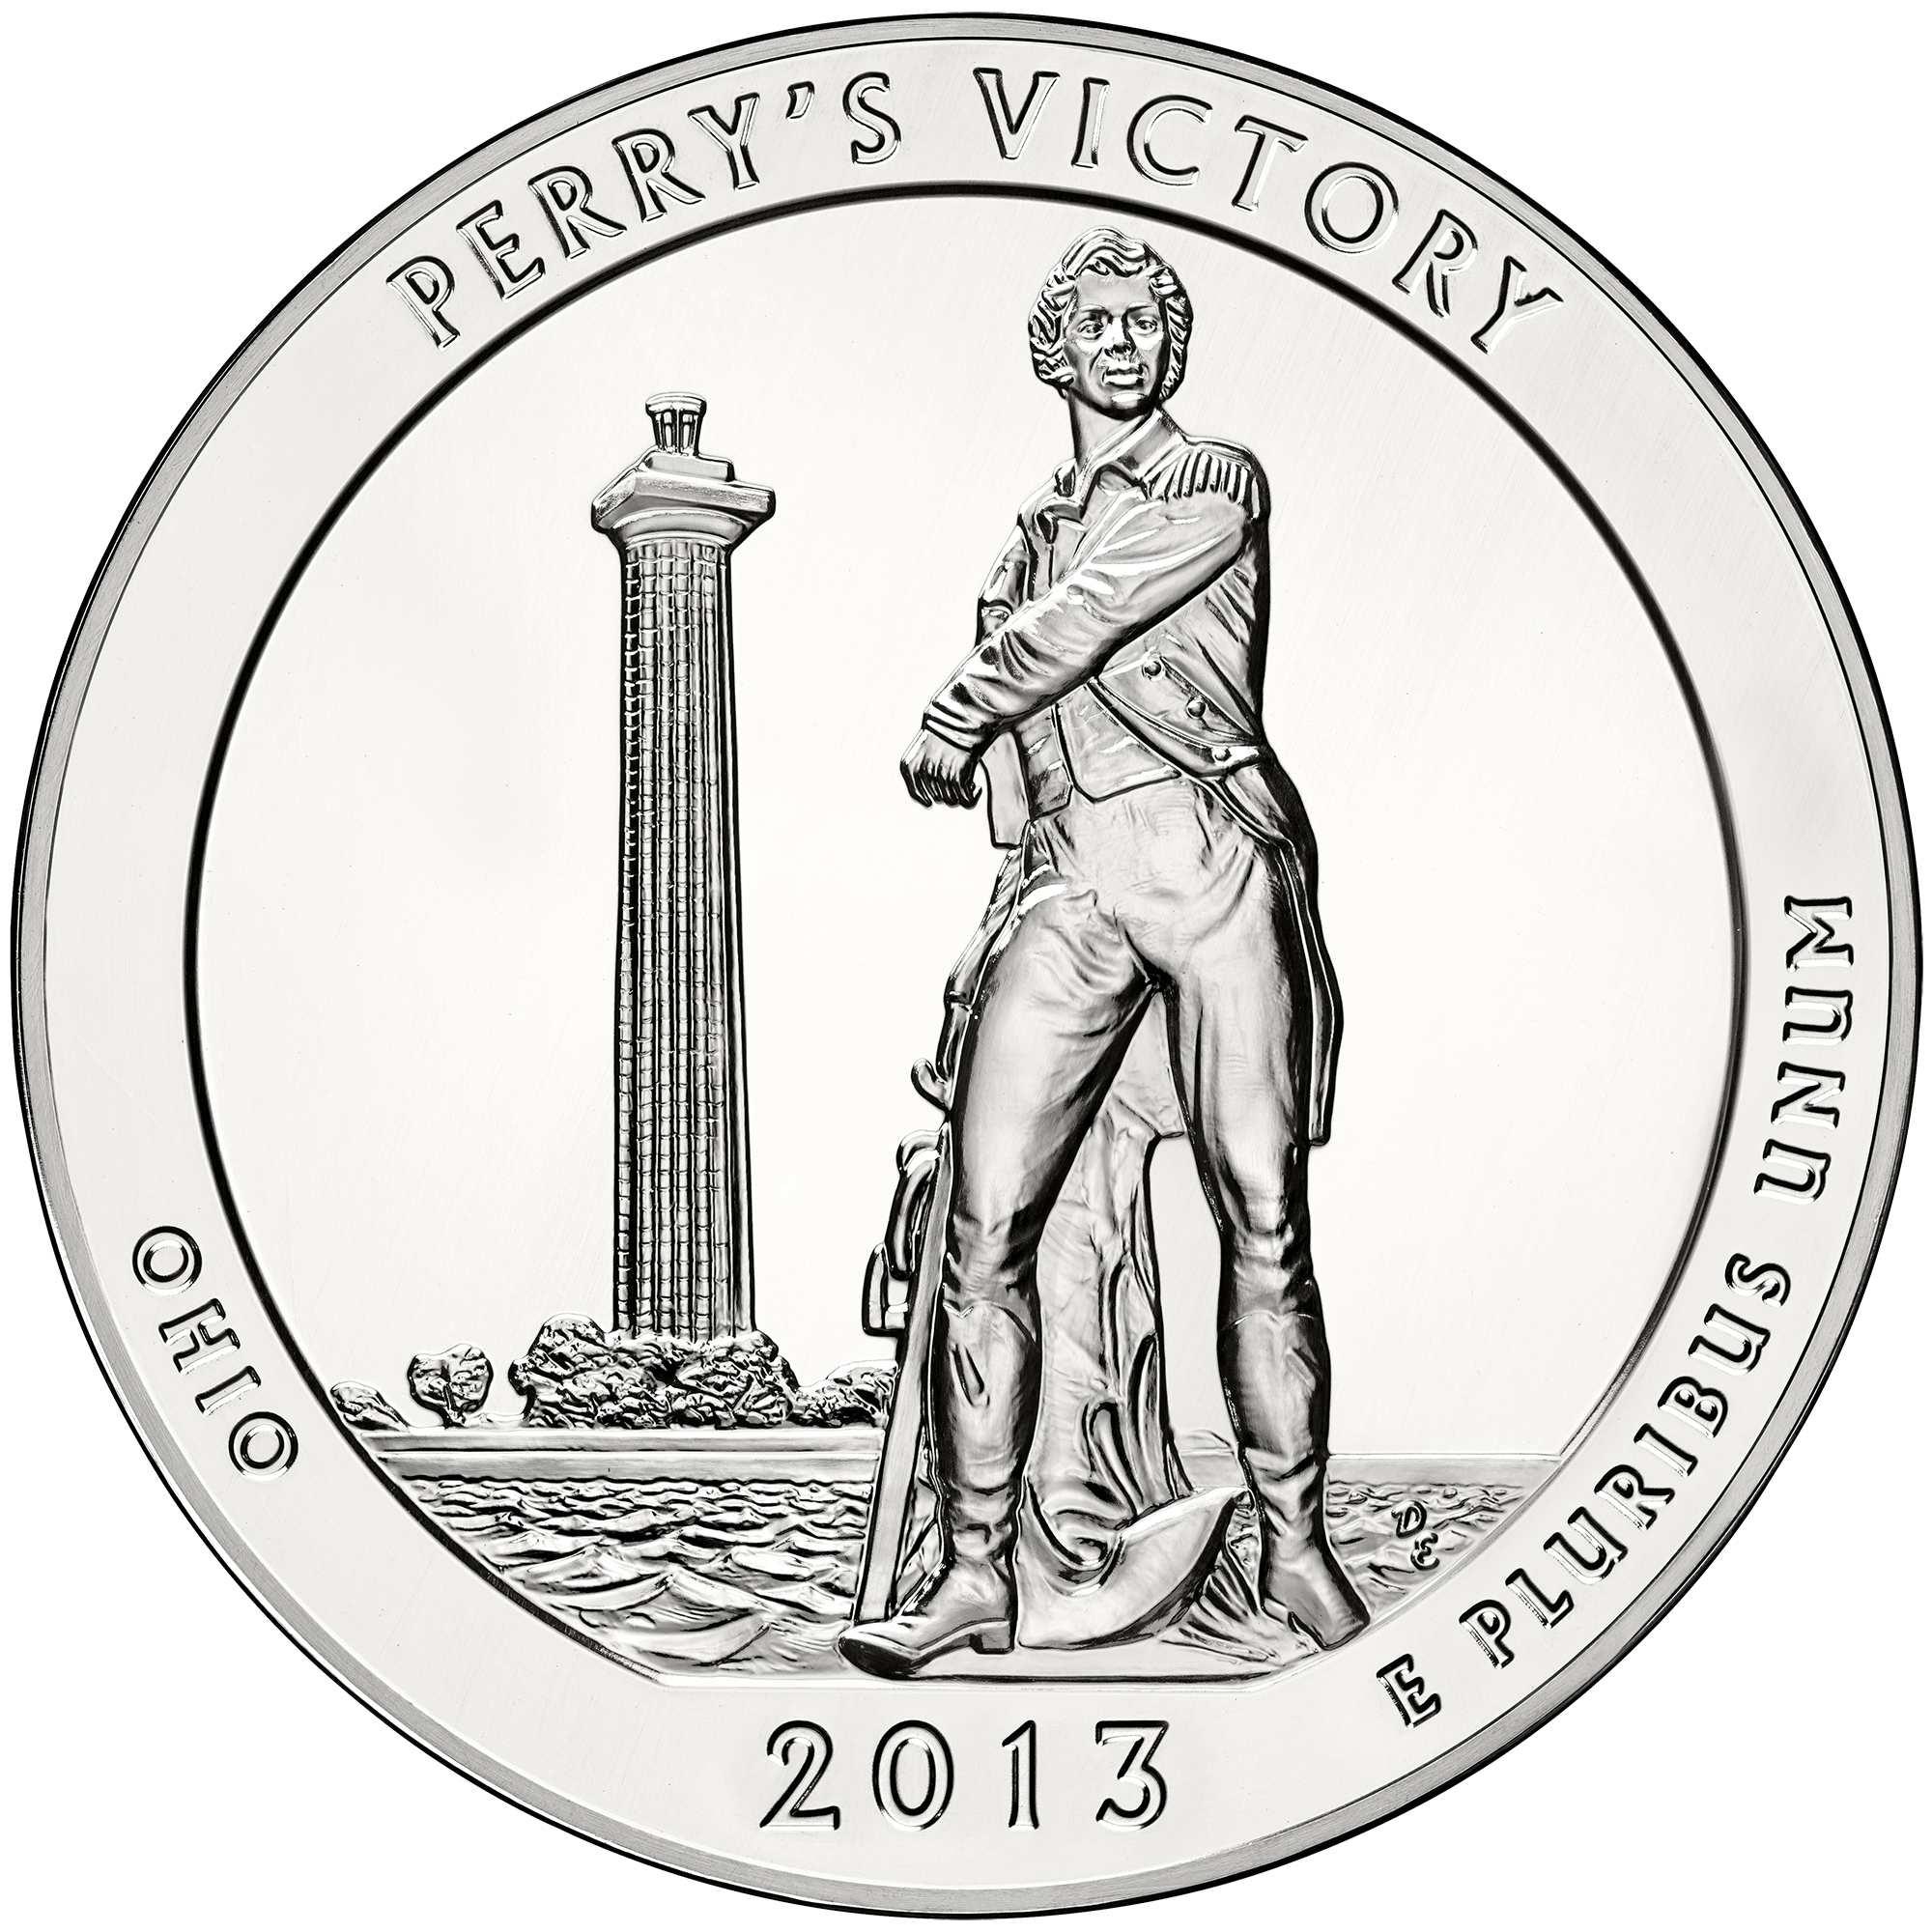 2013 America The Beautiful Quarters Five Ounce Silver Bullion Coin Perrys Victory Ohio Reverse